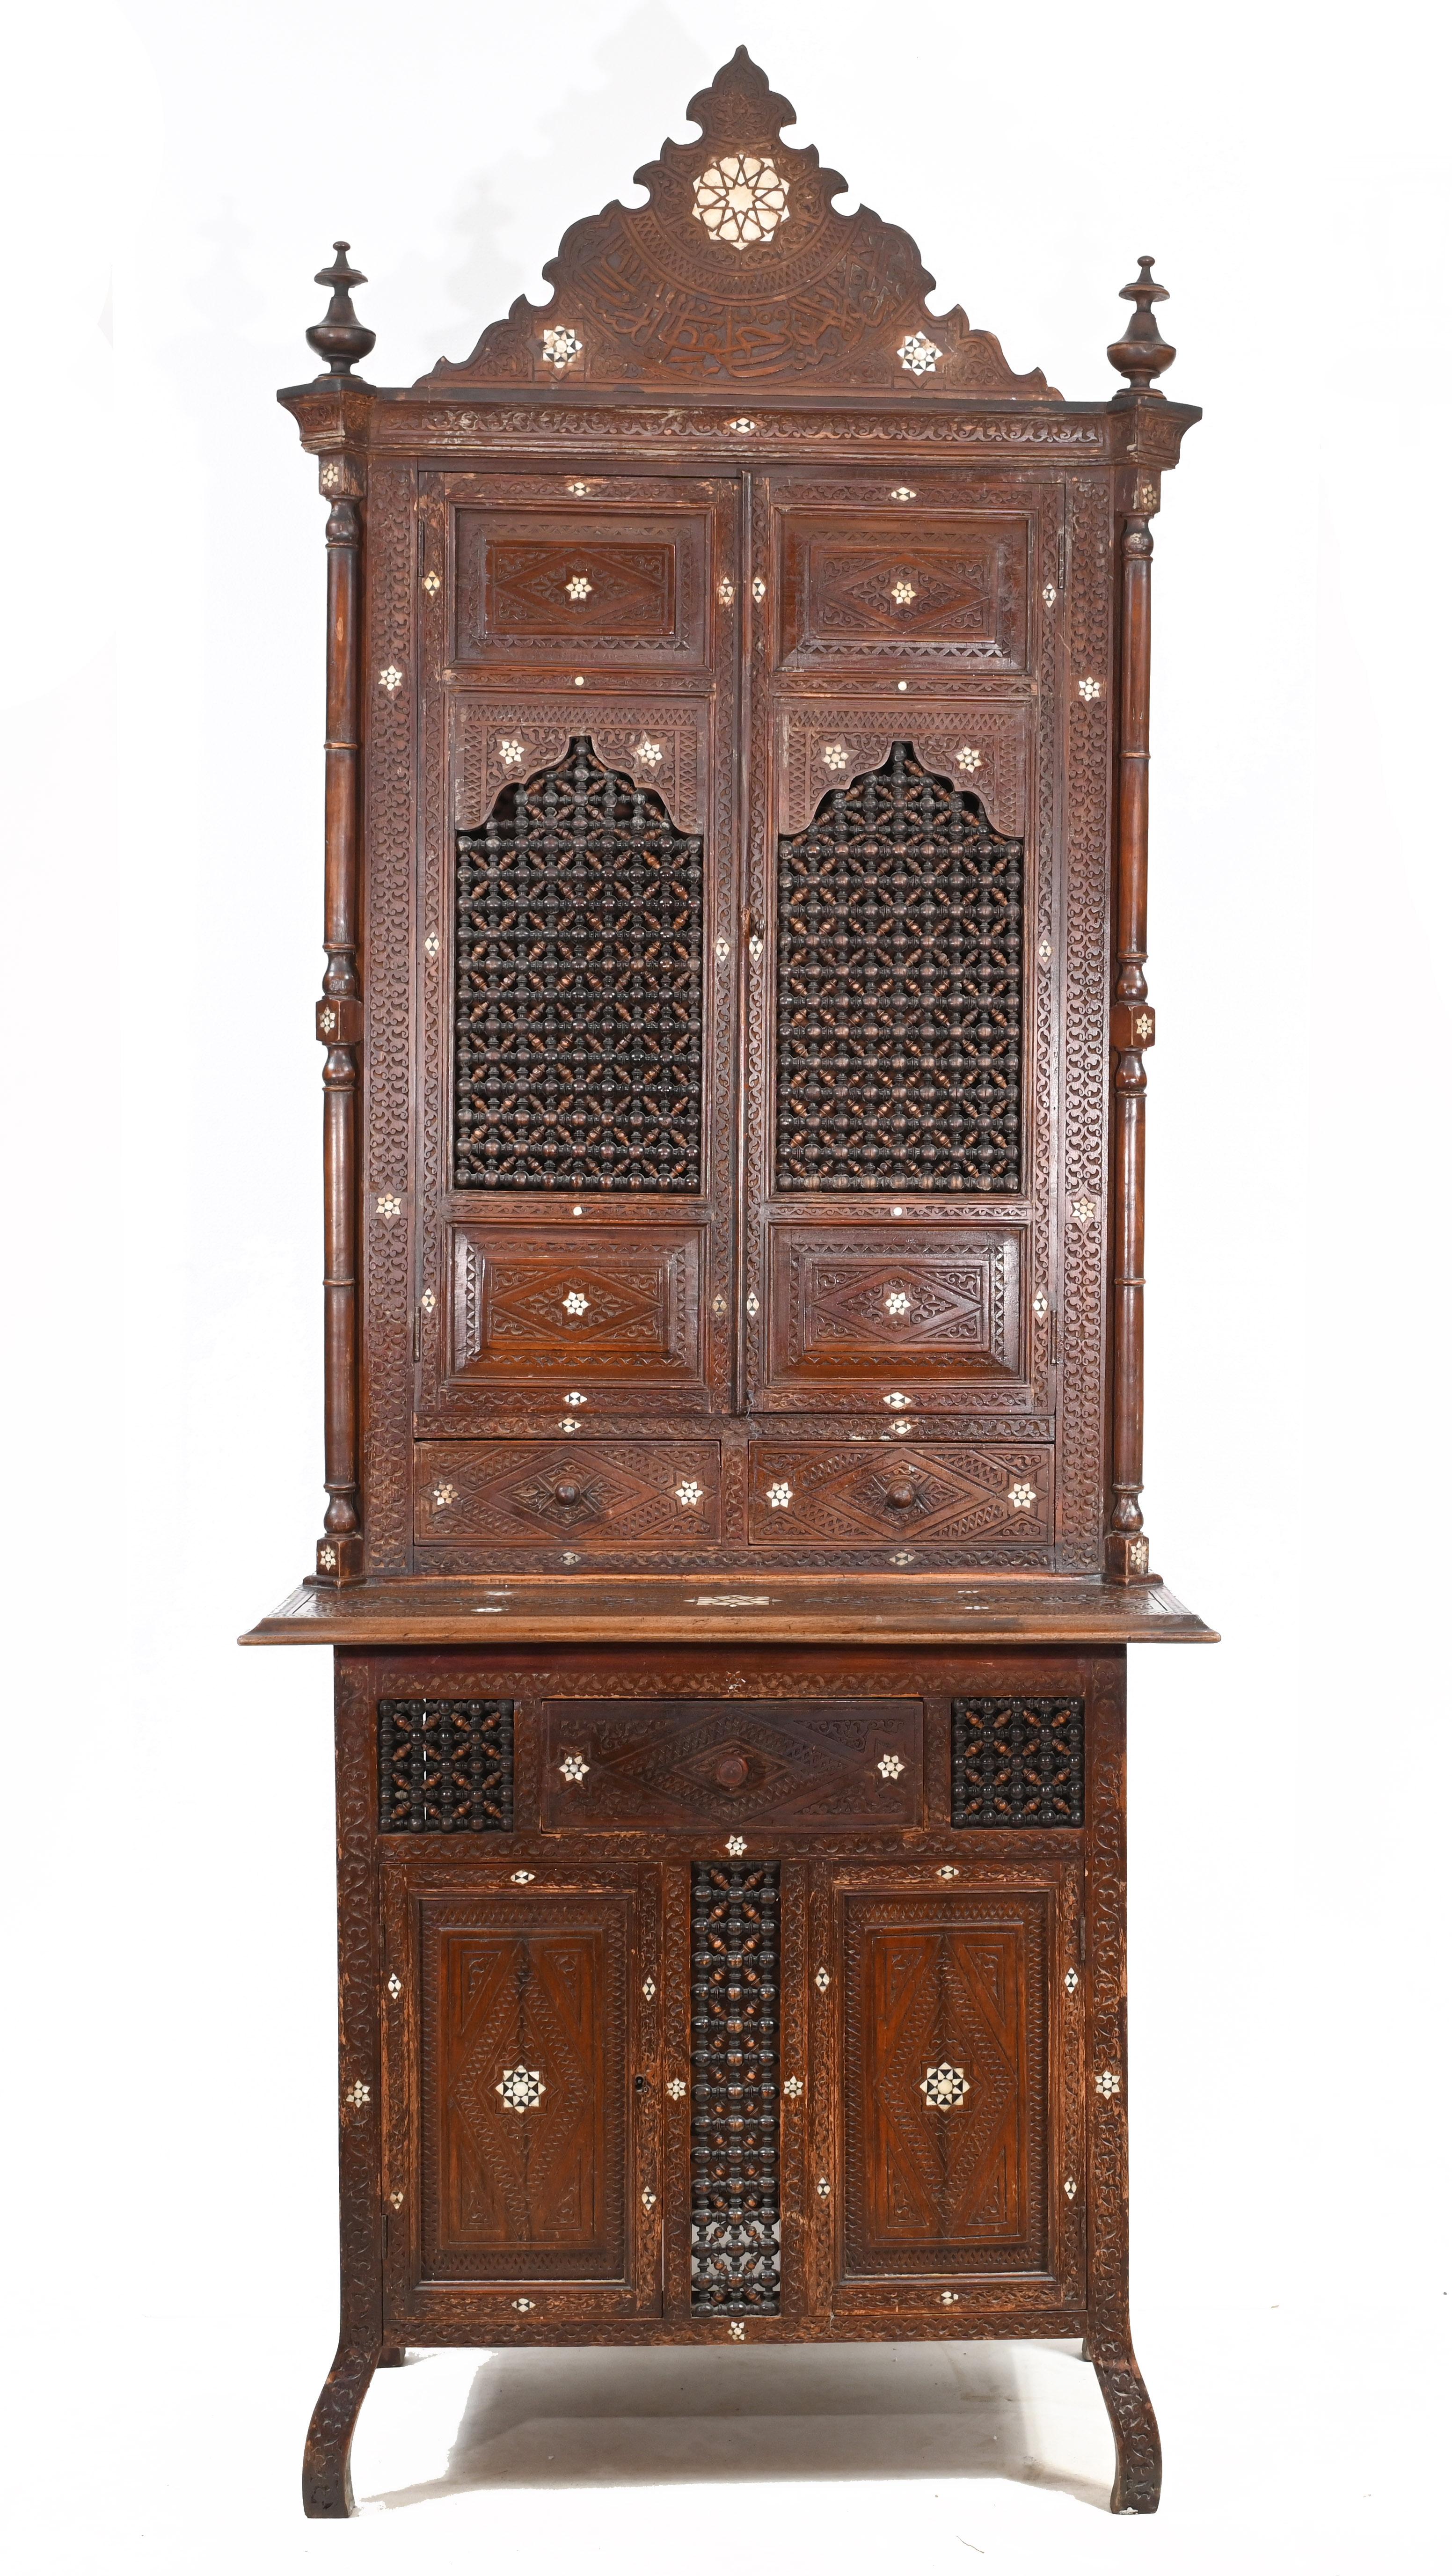 You are viewing a wonderful Syrian antique cabinet or bookcase
Very on trend, the Bohemian chic of Islamic and Middle Eastern furniture is very popular in the interiors world
Wonderful interplay between bone inlay work and hand carved